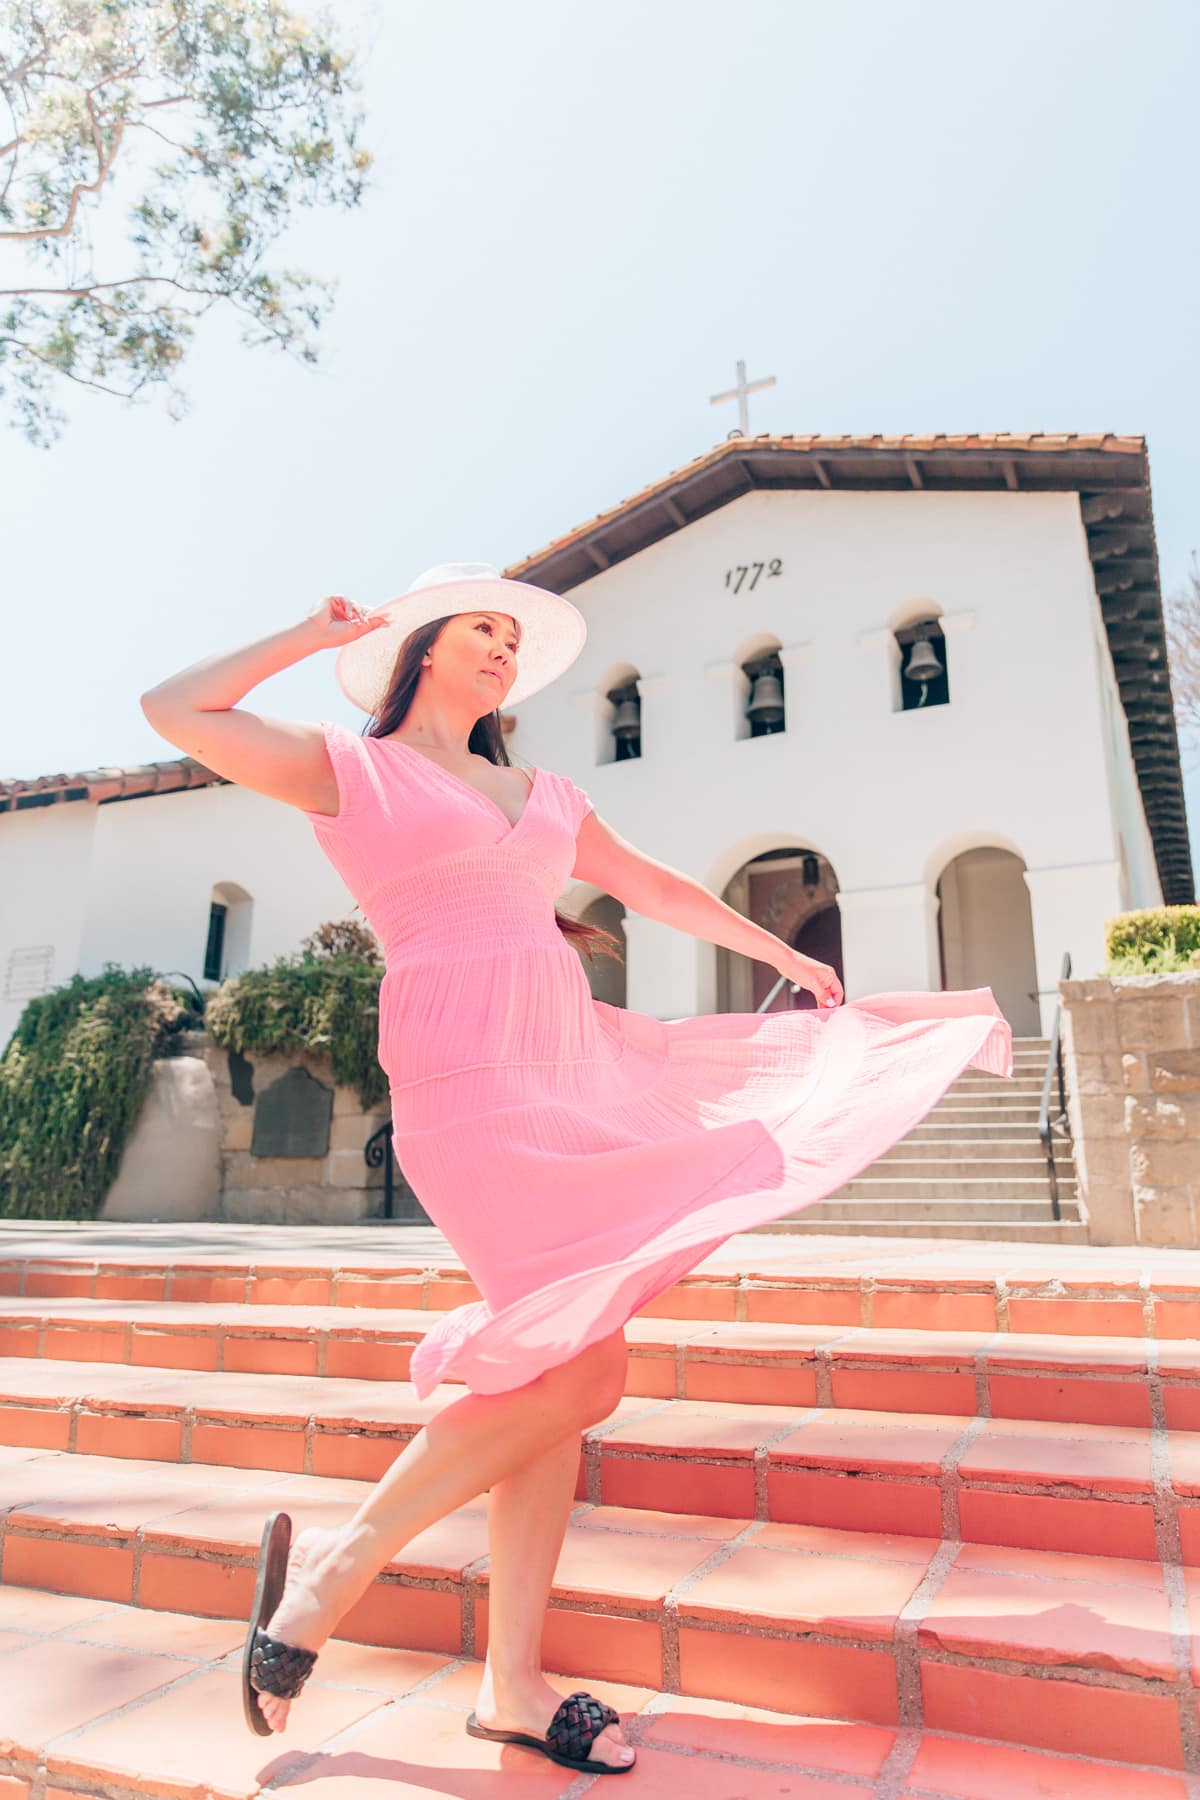 Visiting Mission San Luis Obispo, by travel blogger What The Fab